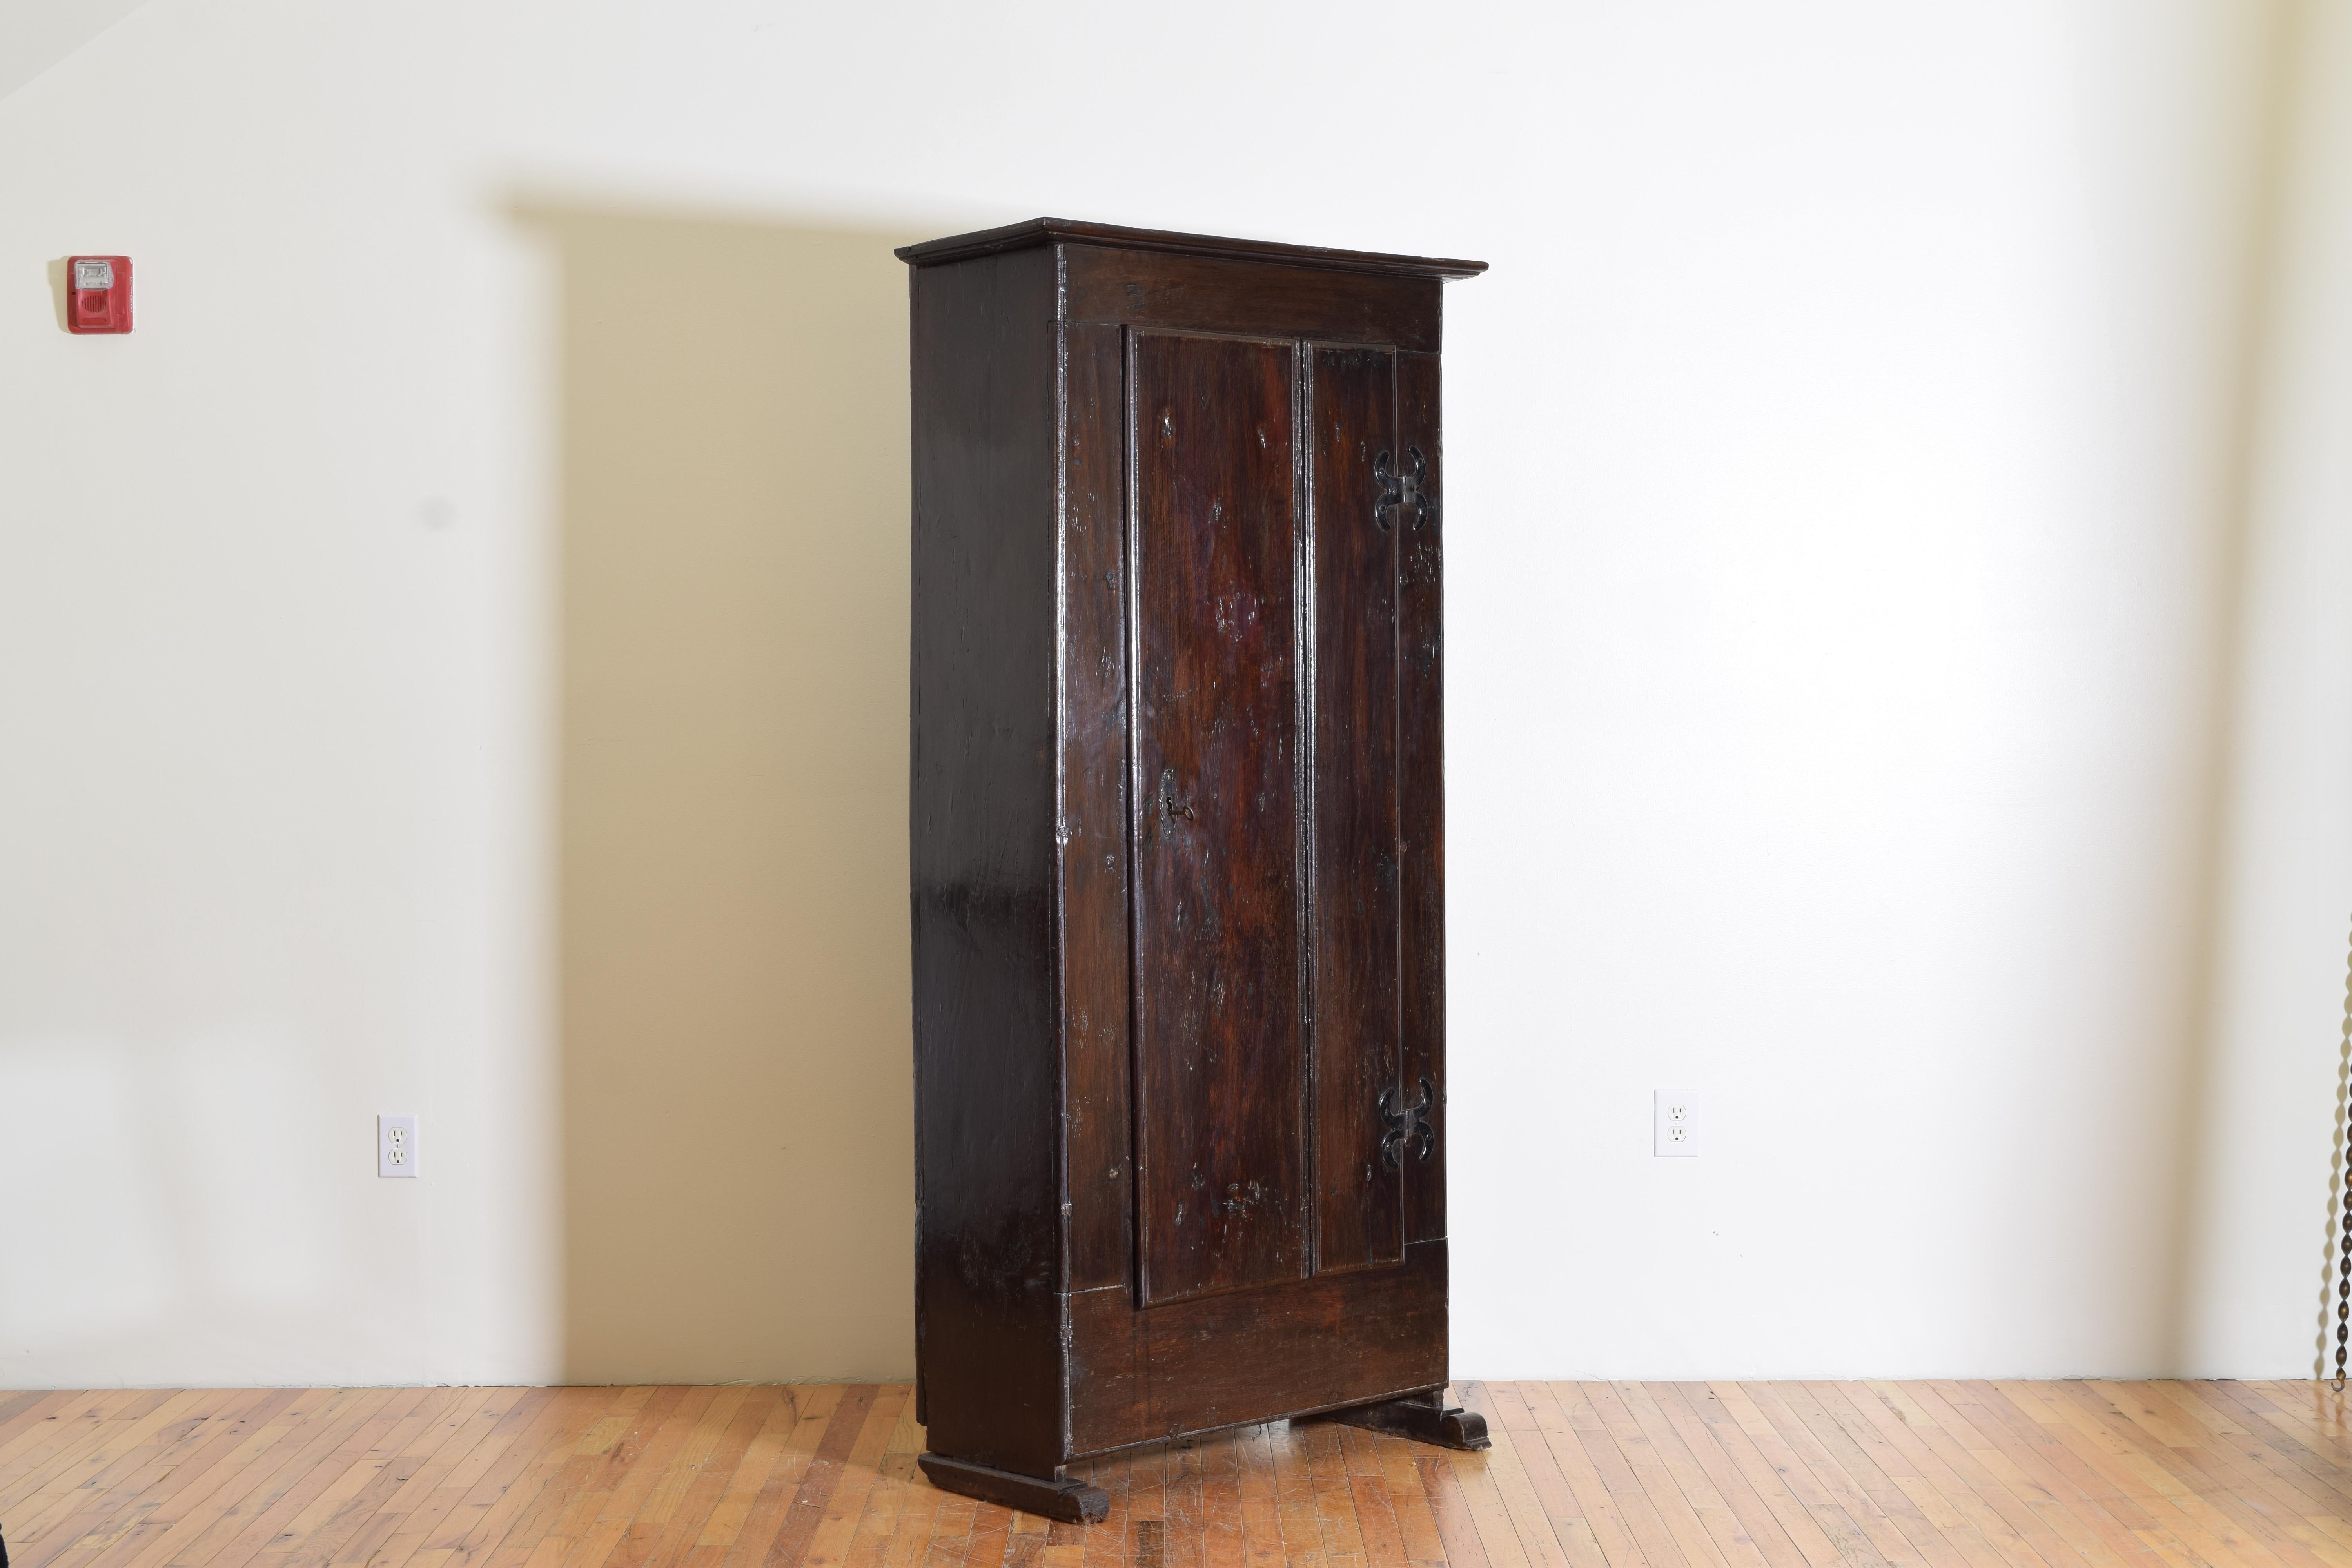 From Northern Spain, constructed of solid oak, crudely carved one door hinged with decorative as well as functional iron strapping raised on two plinth sleigh-like bases. The Interior has three shelves for storage.